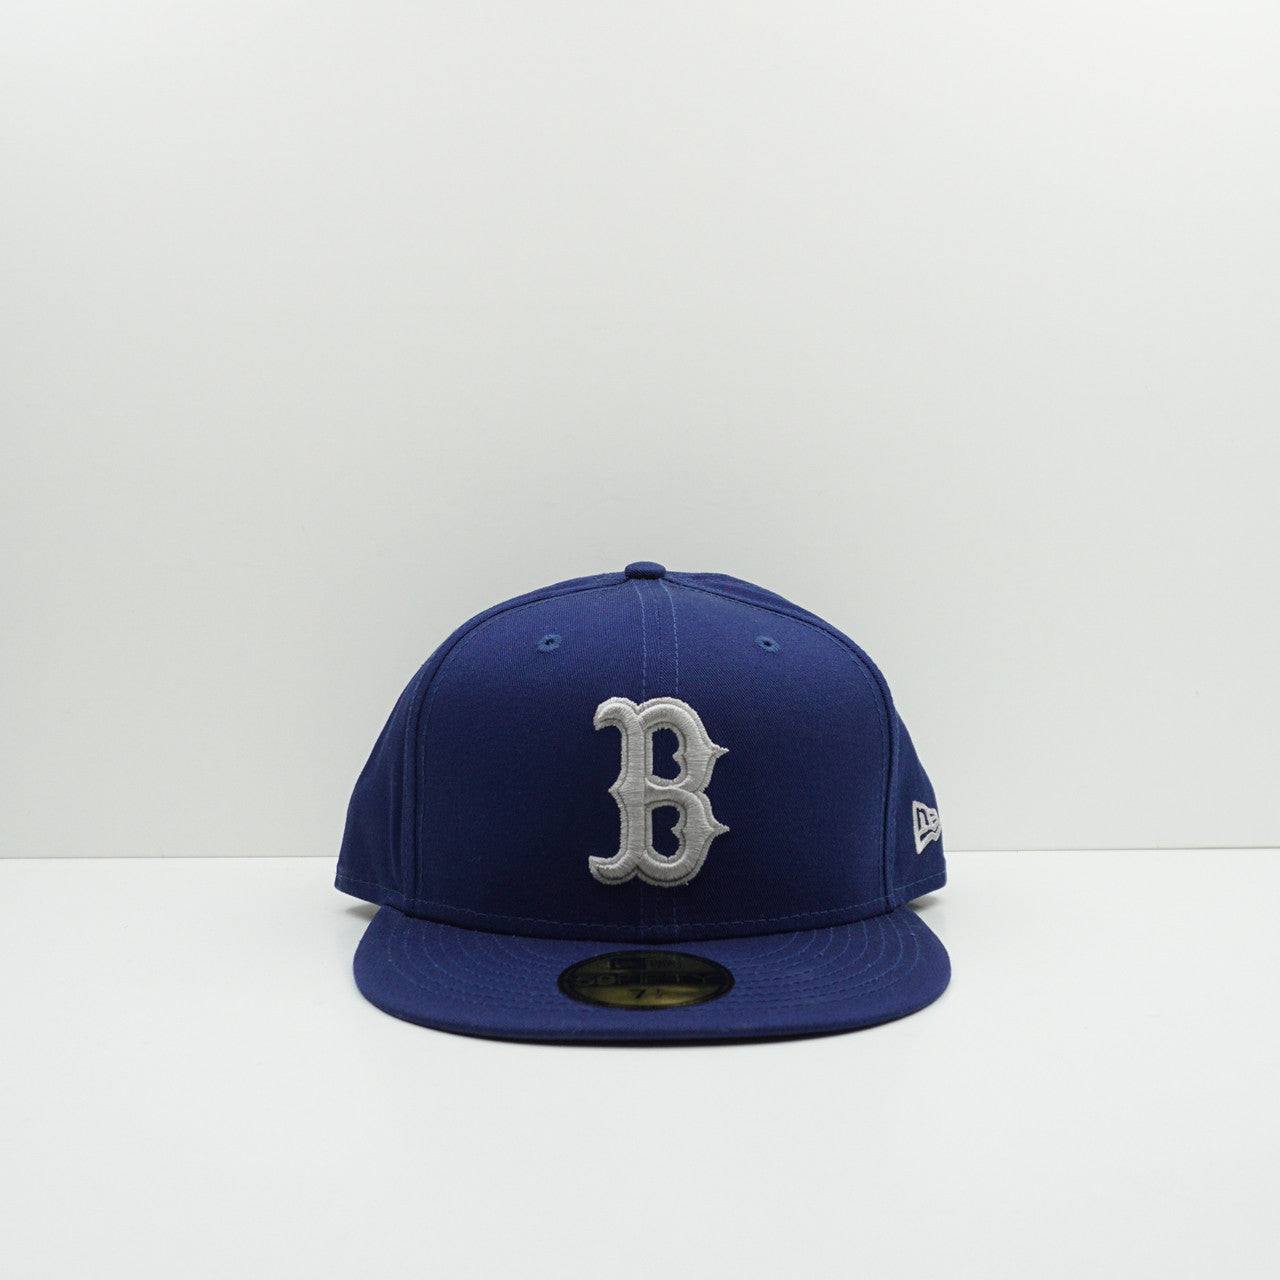 New Era Boston Red Sox Blue/Grey Fitted Cap